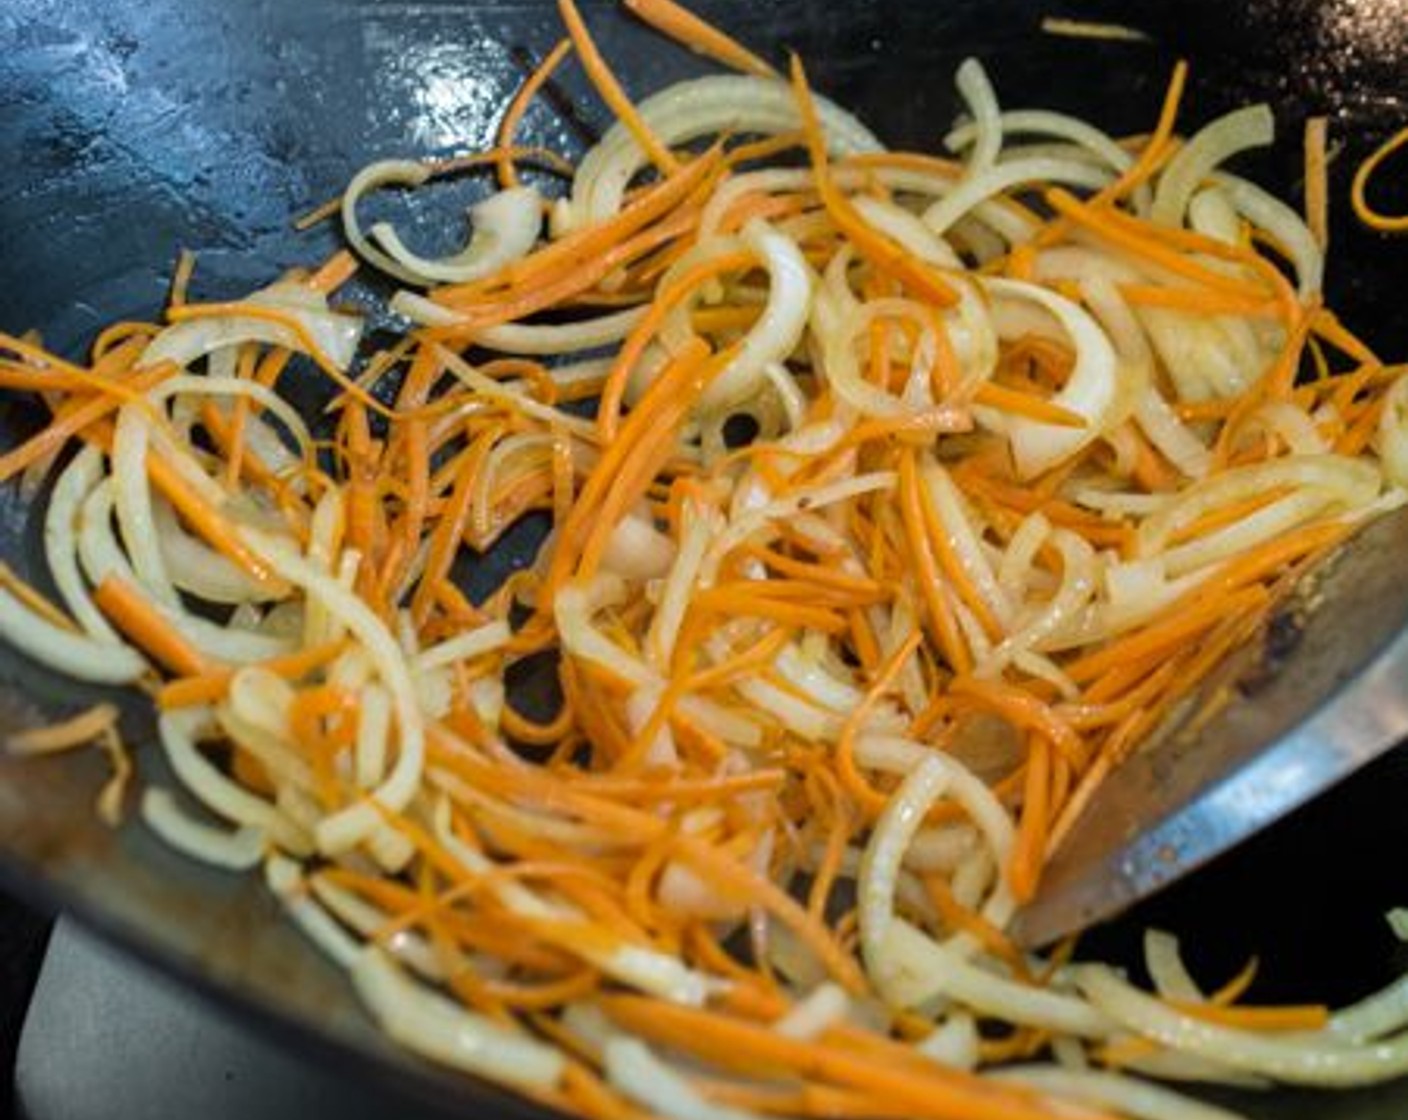 step 7 Stir-fry carrots and onions until just before the onion turns translucent. Set aside.